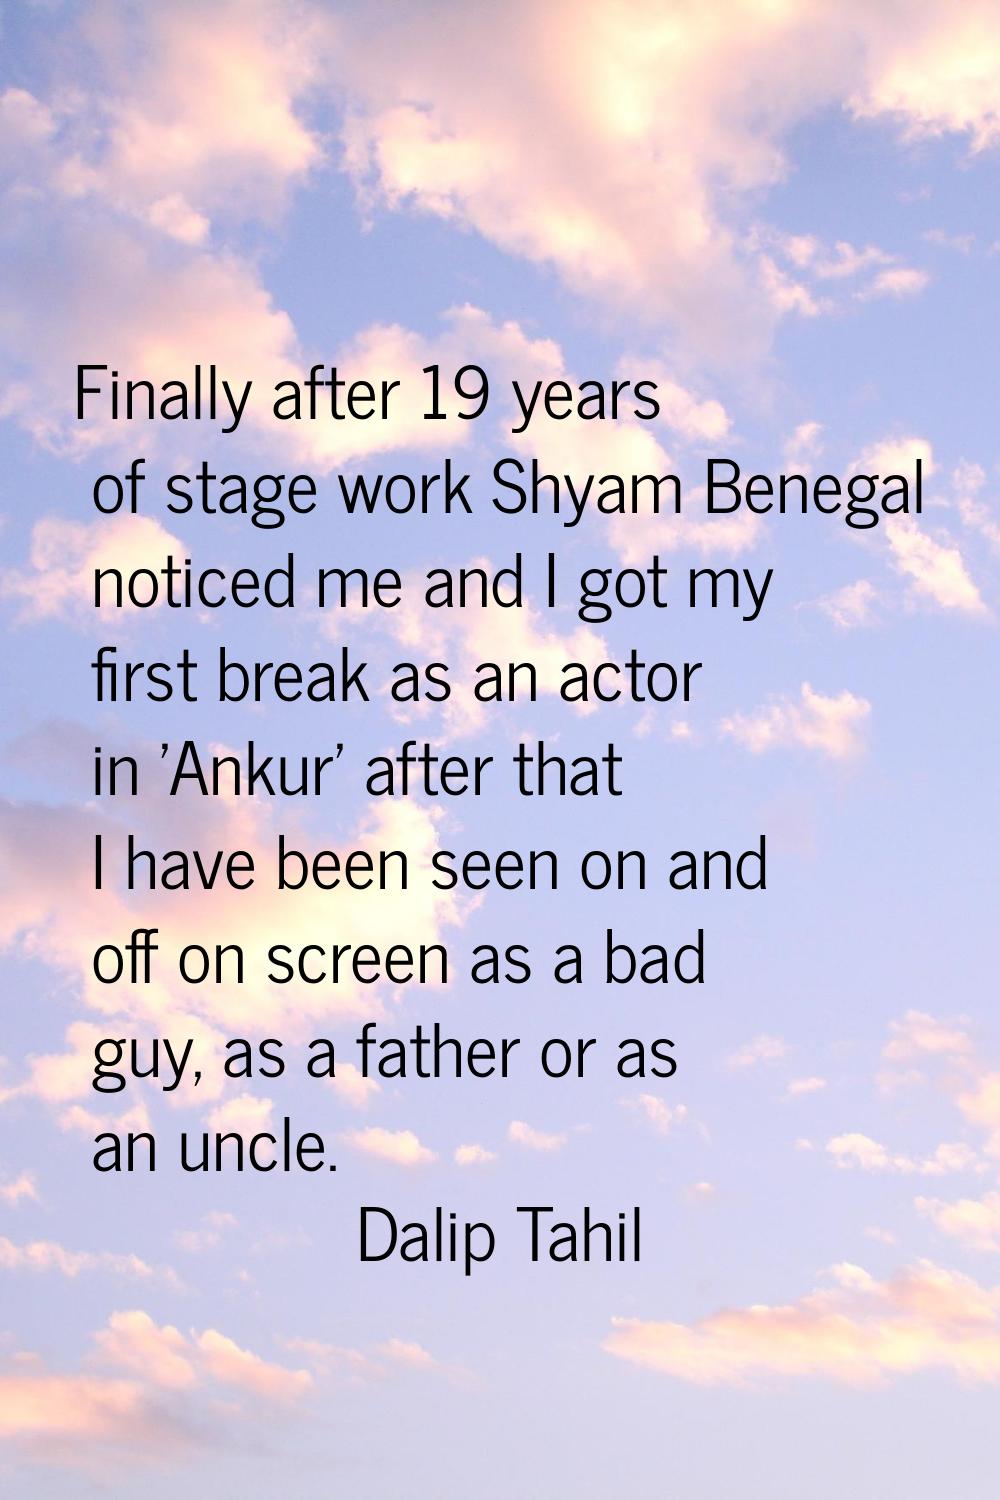 Finally after 19 years of stage work Shyam Benegal noticed me and I got my first break as an actor 